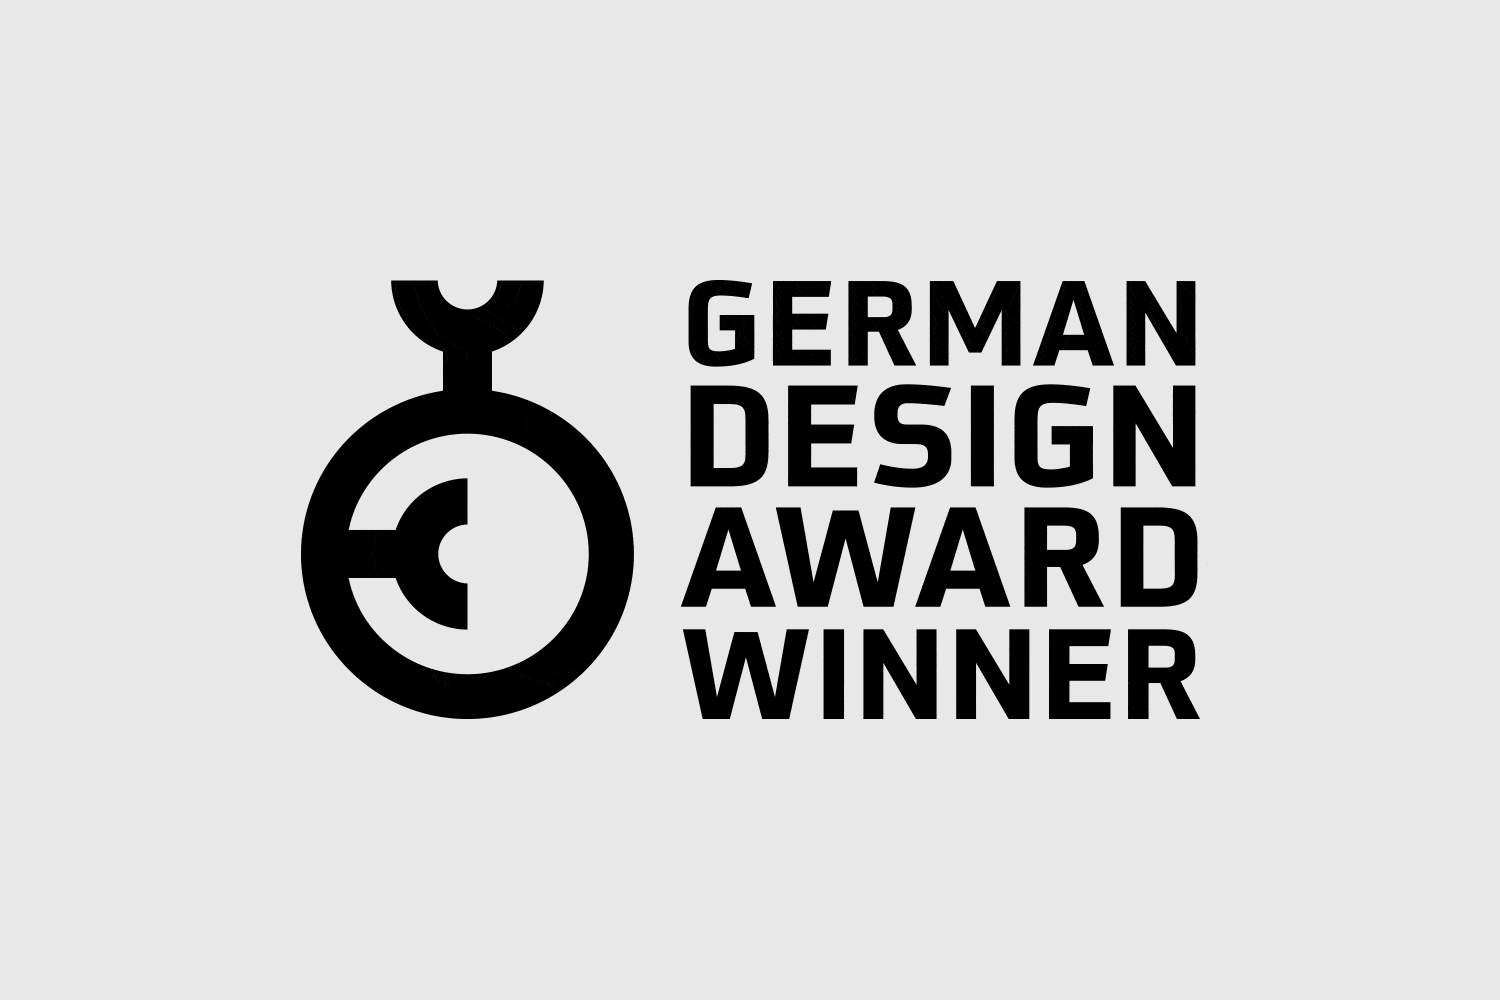 On this animated picture logos of some awards of Mehnert Design can be seen.